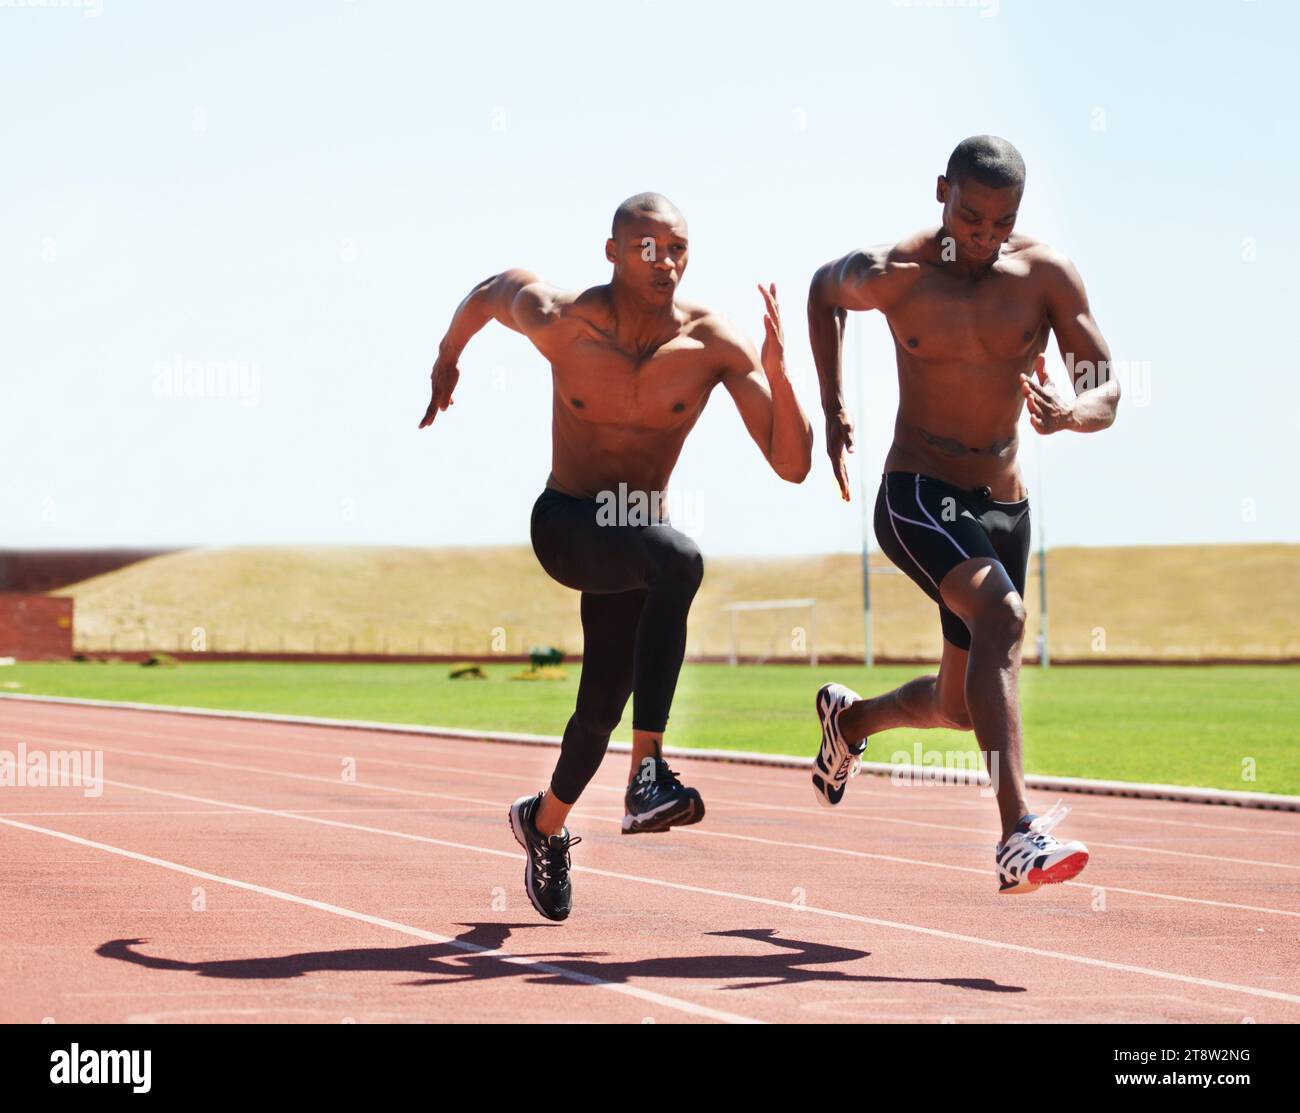 Man, athlete and running on track for race, practice or training for competition. Black people, together and competitive with dedication, motivation Stock Photo